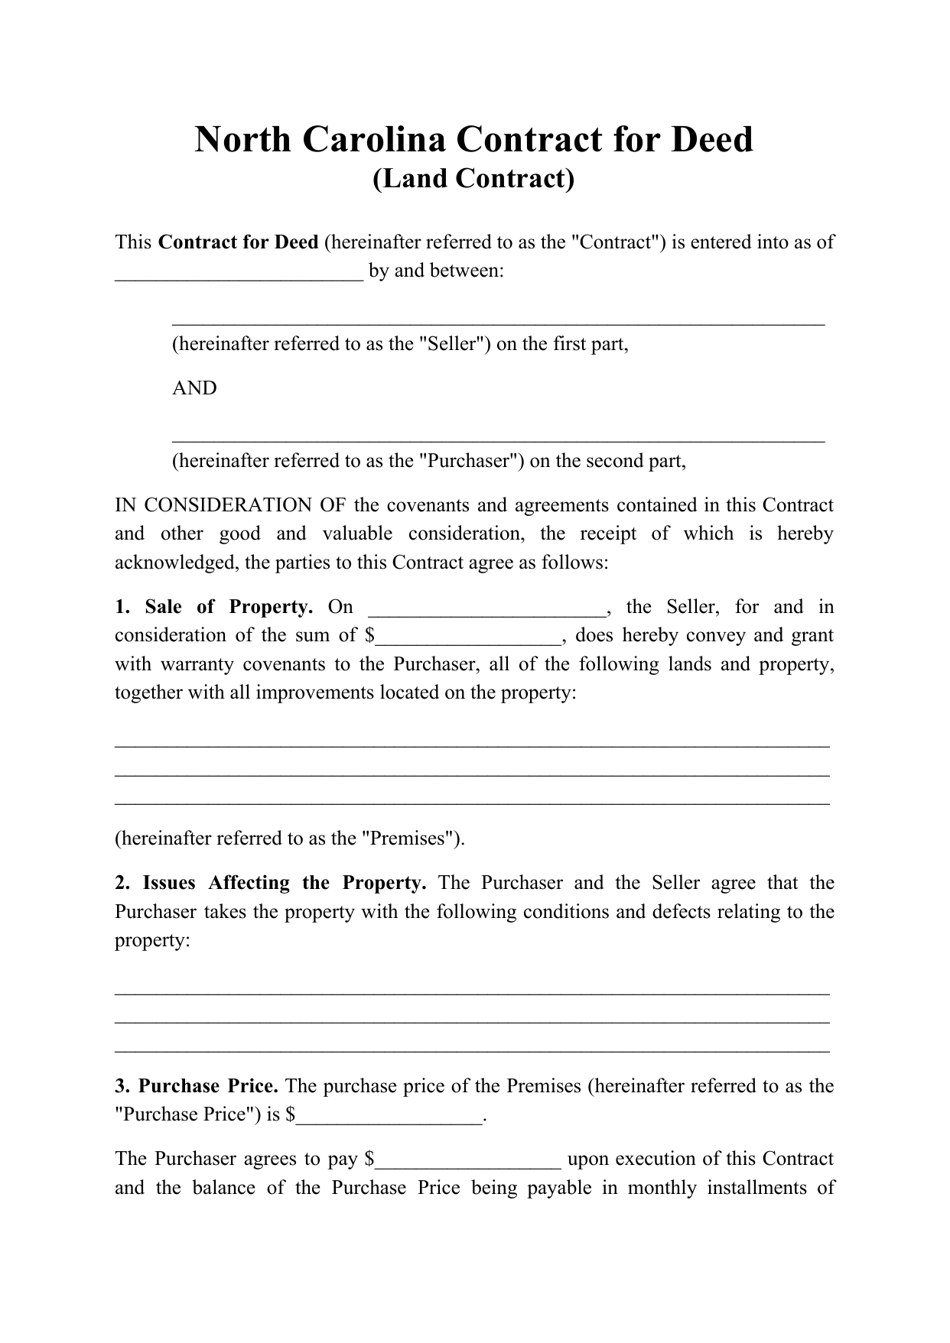 North Carolina Contract for Deed (Land Contract) Fill Out Sign